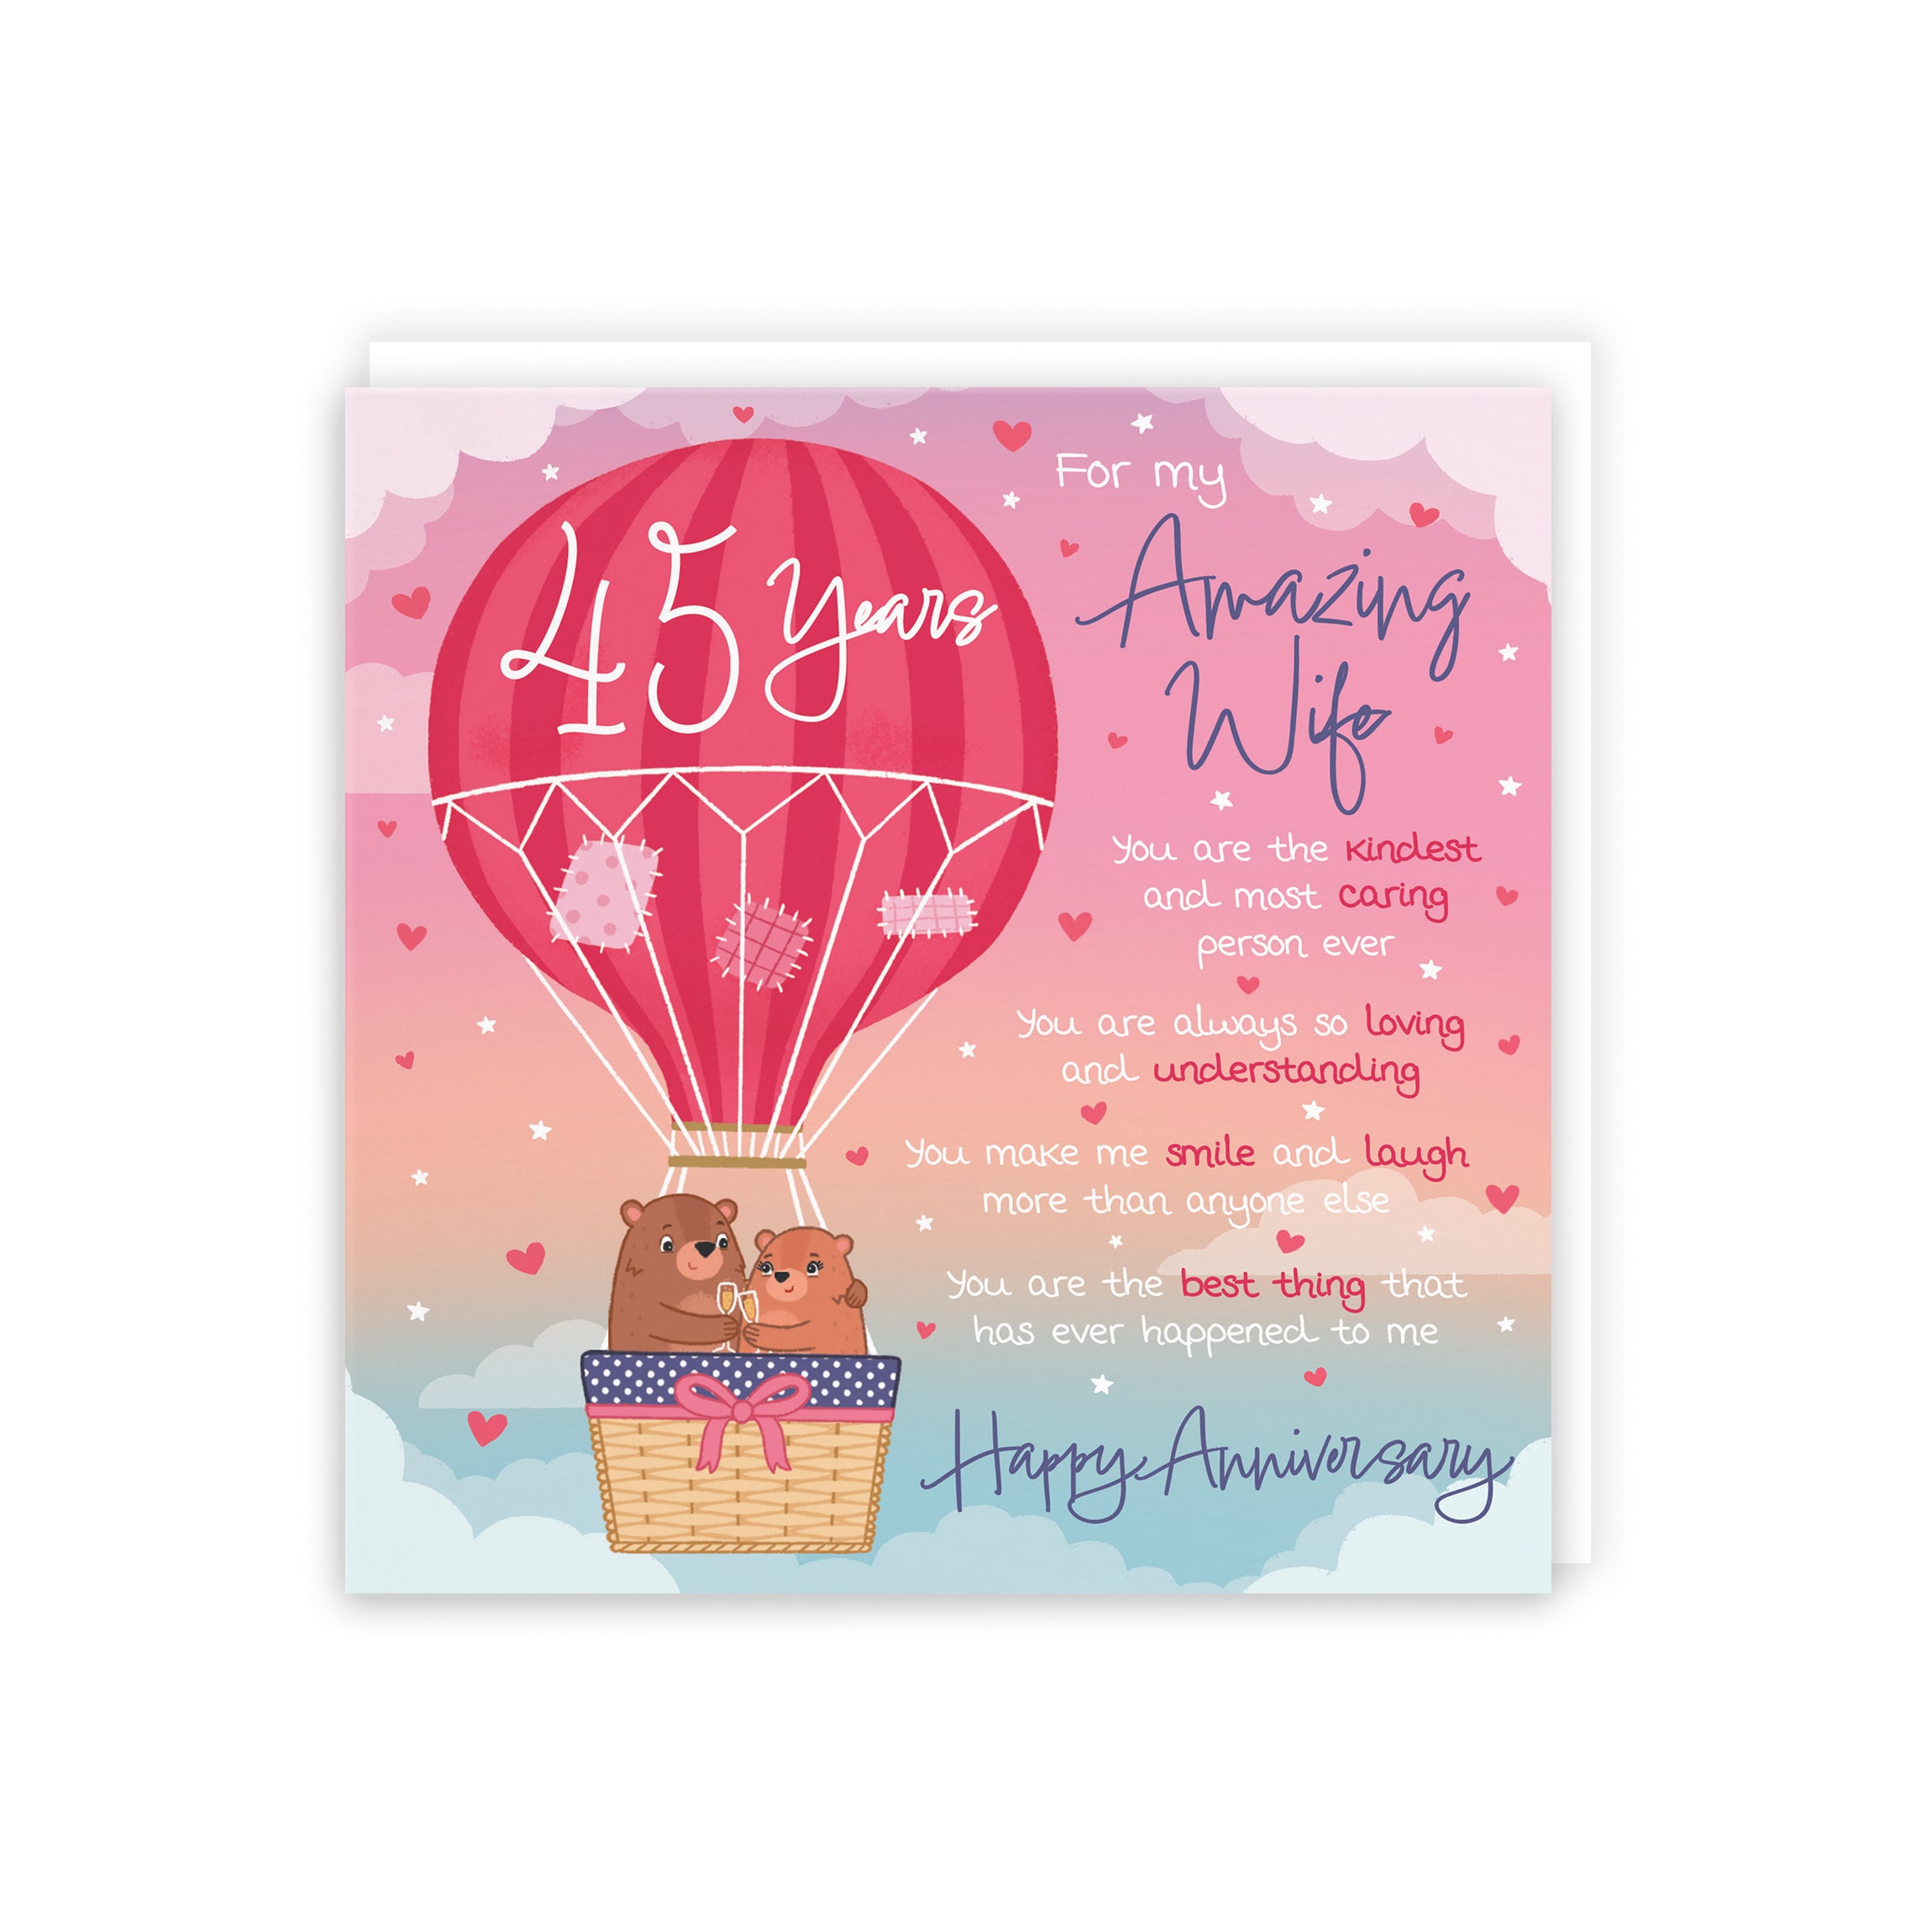 Wife 45th Anniversary Poem Card Love Is In The Air Cute Bears